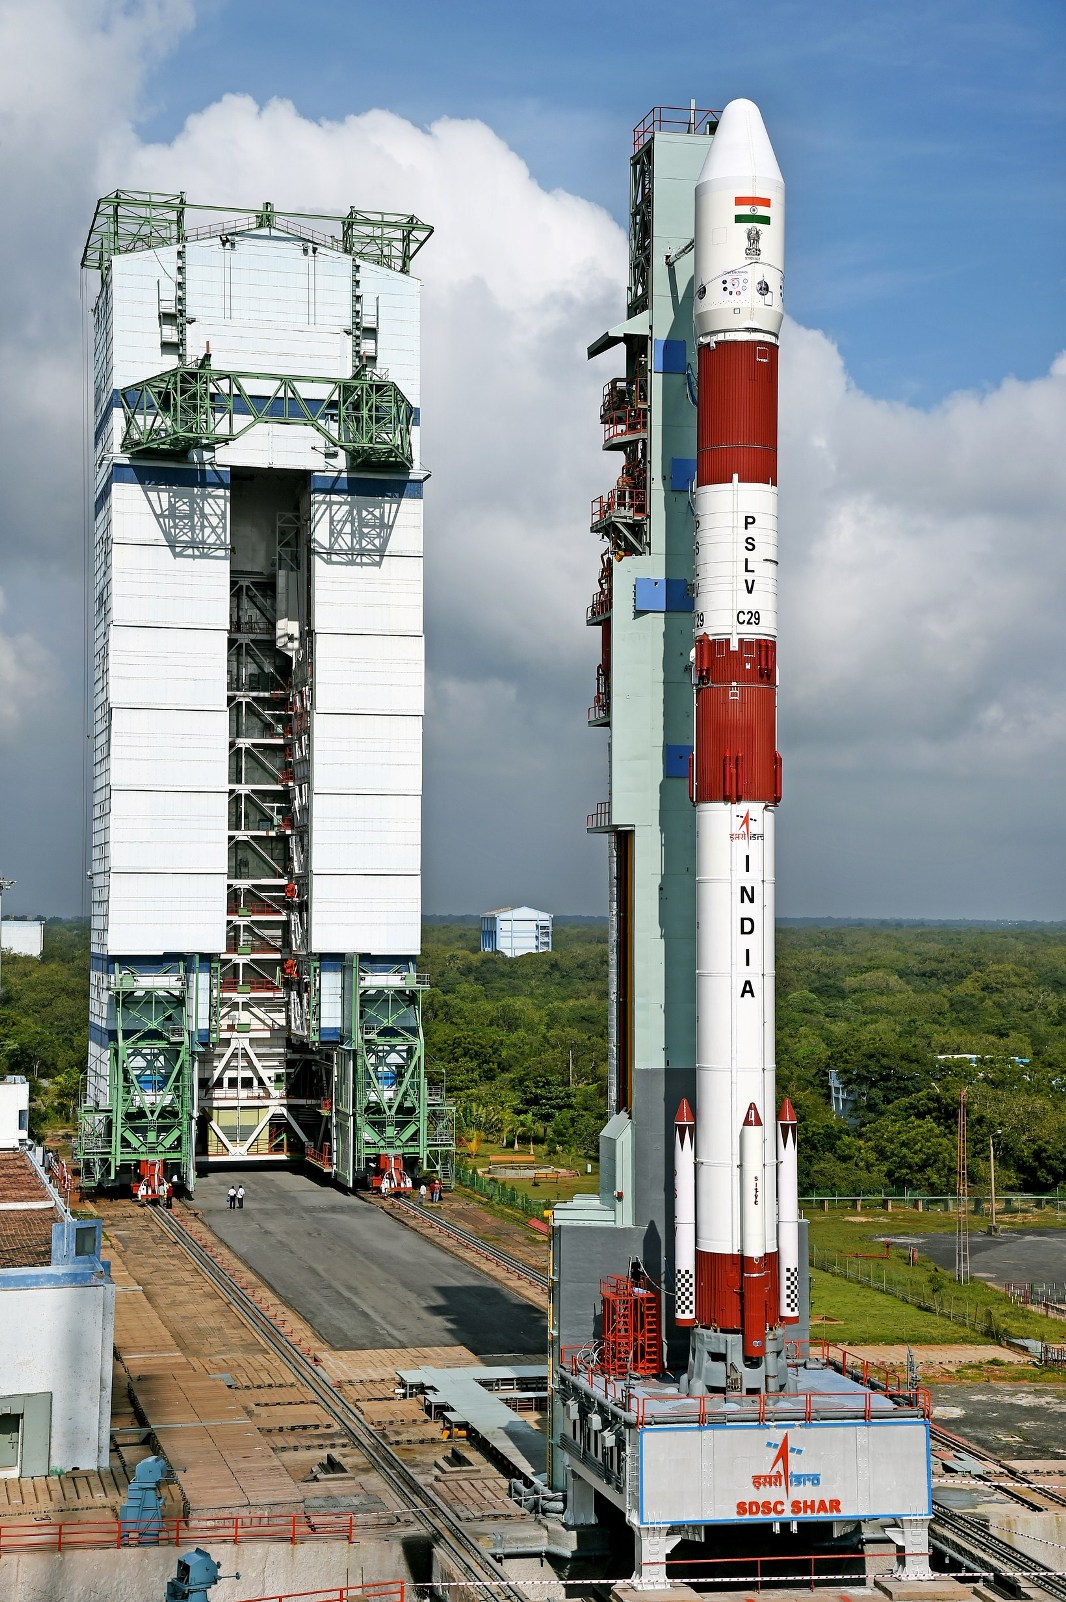 pslv-c29_on_the_first_launch_pad_with_vehicle_assembly_building_in_background.jpg